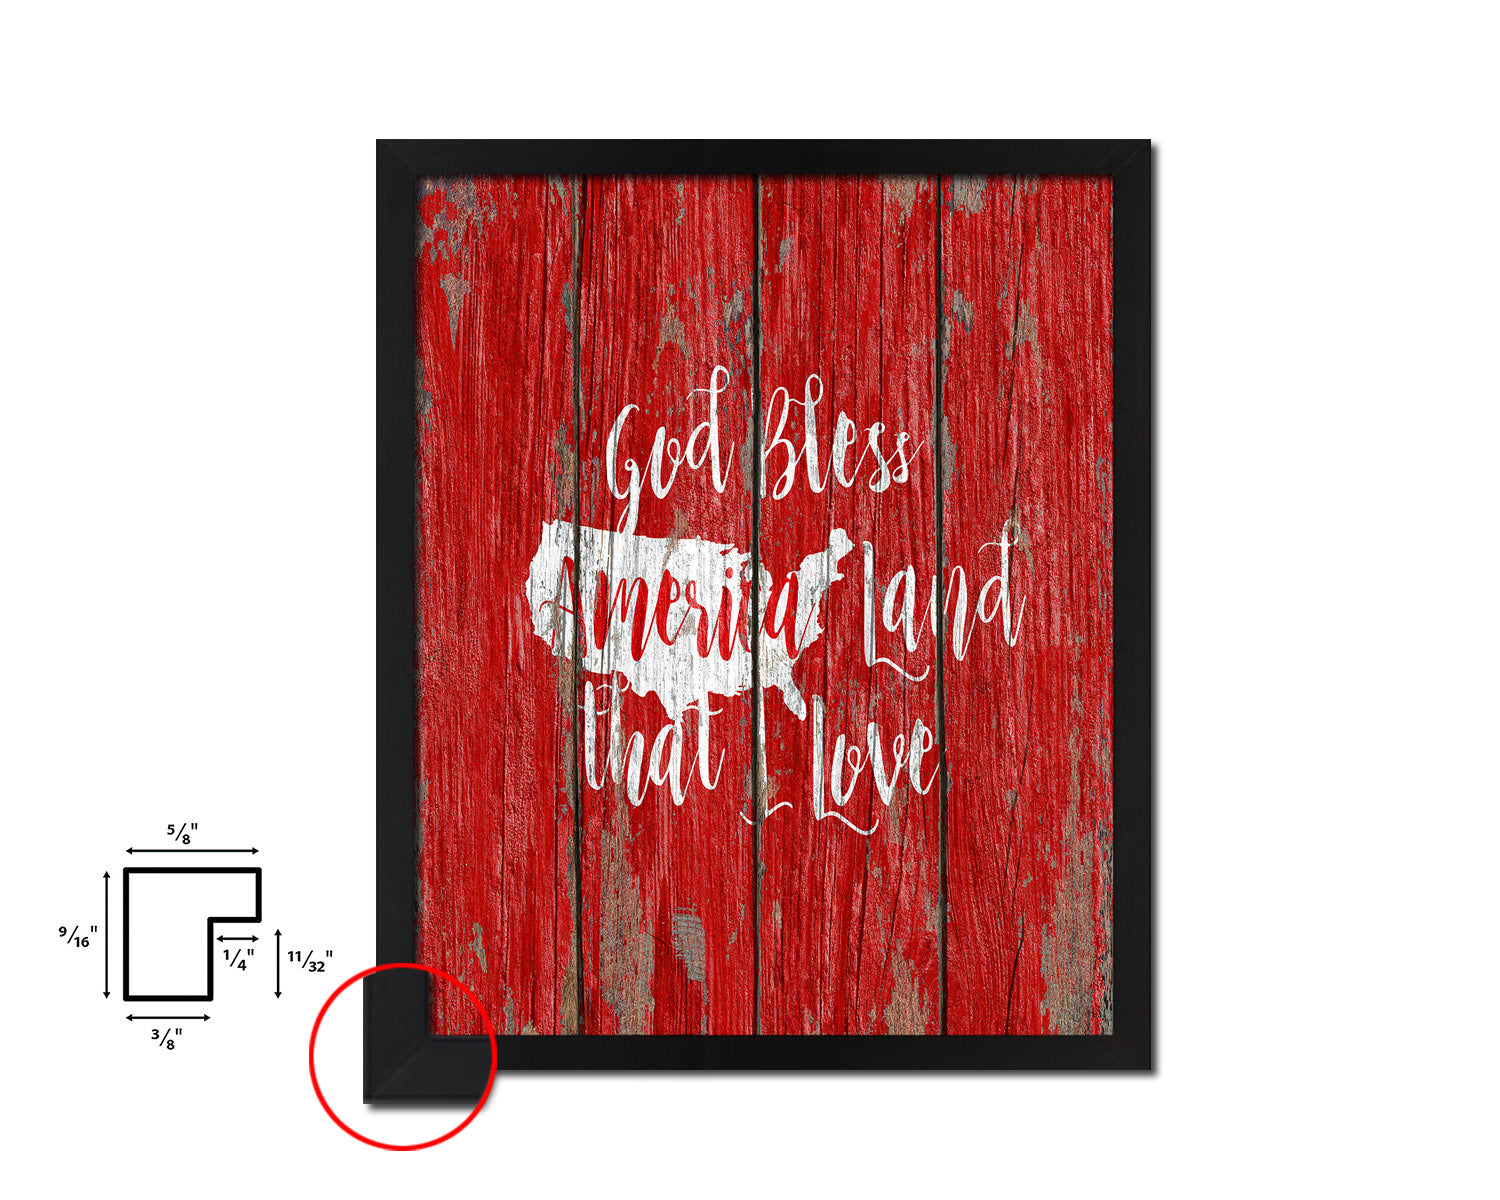 God bless America land that I love Quote Framed Print Home Decor Wall Art Gifts